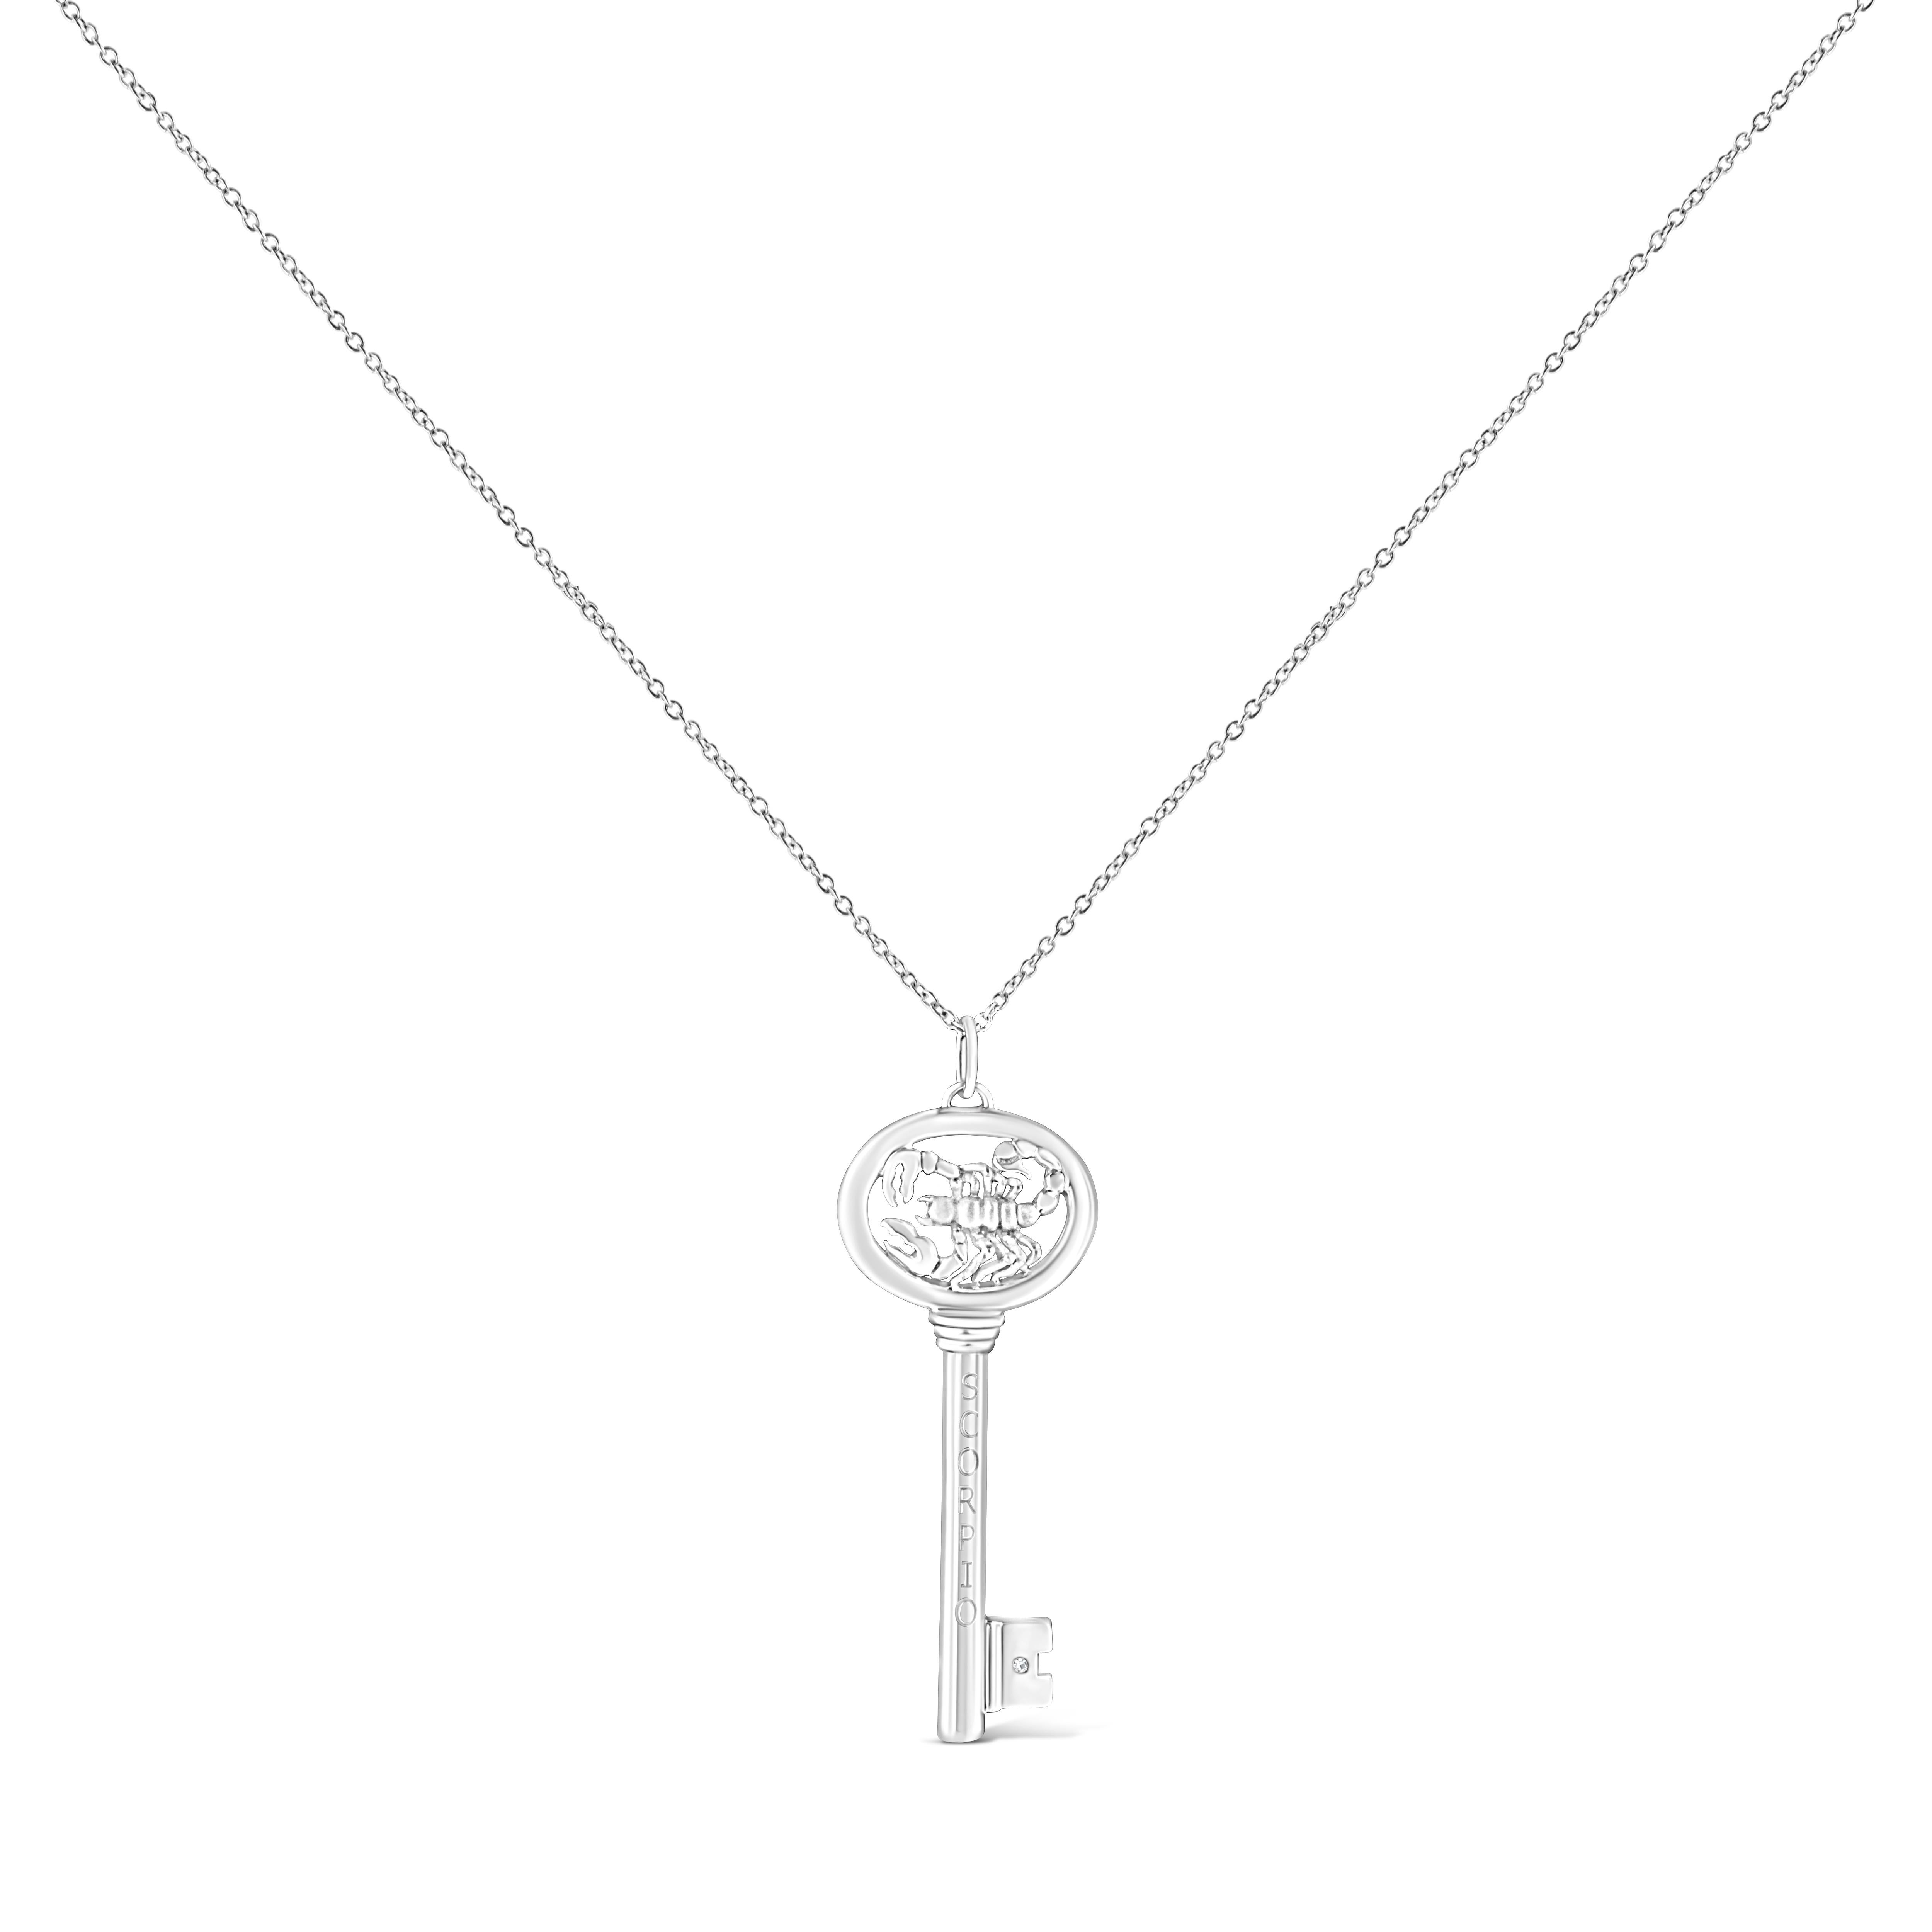 It's as if the stars aligned to create this stunning .925 Sterling Silver necklace flaunting a Scorpio zodiac pendant accented by a glimmering bezel set natural diamond. Brilliant beacons of optimism and hope, our Zodiac Keys are radiant symbols of